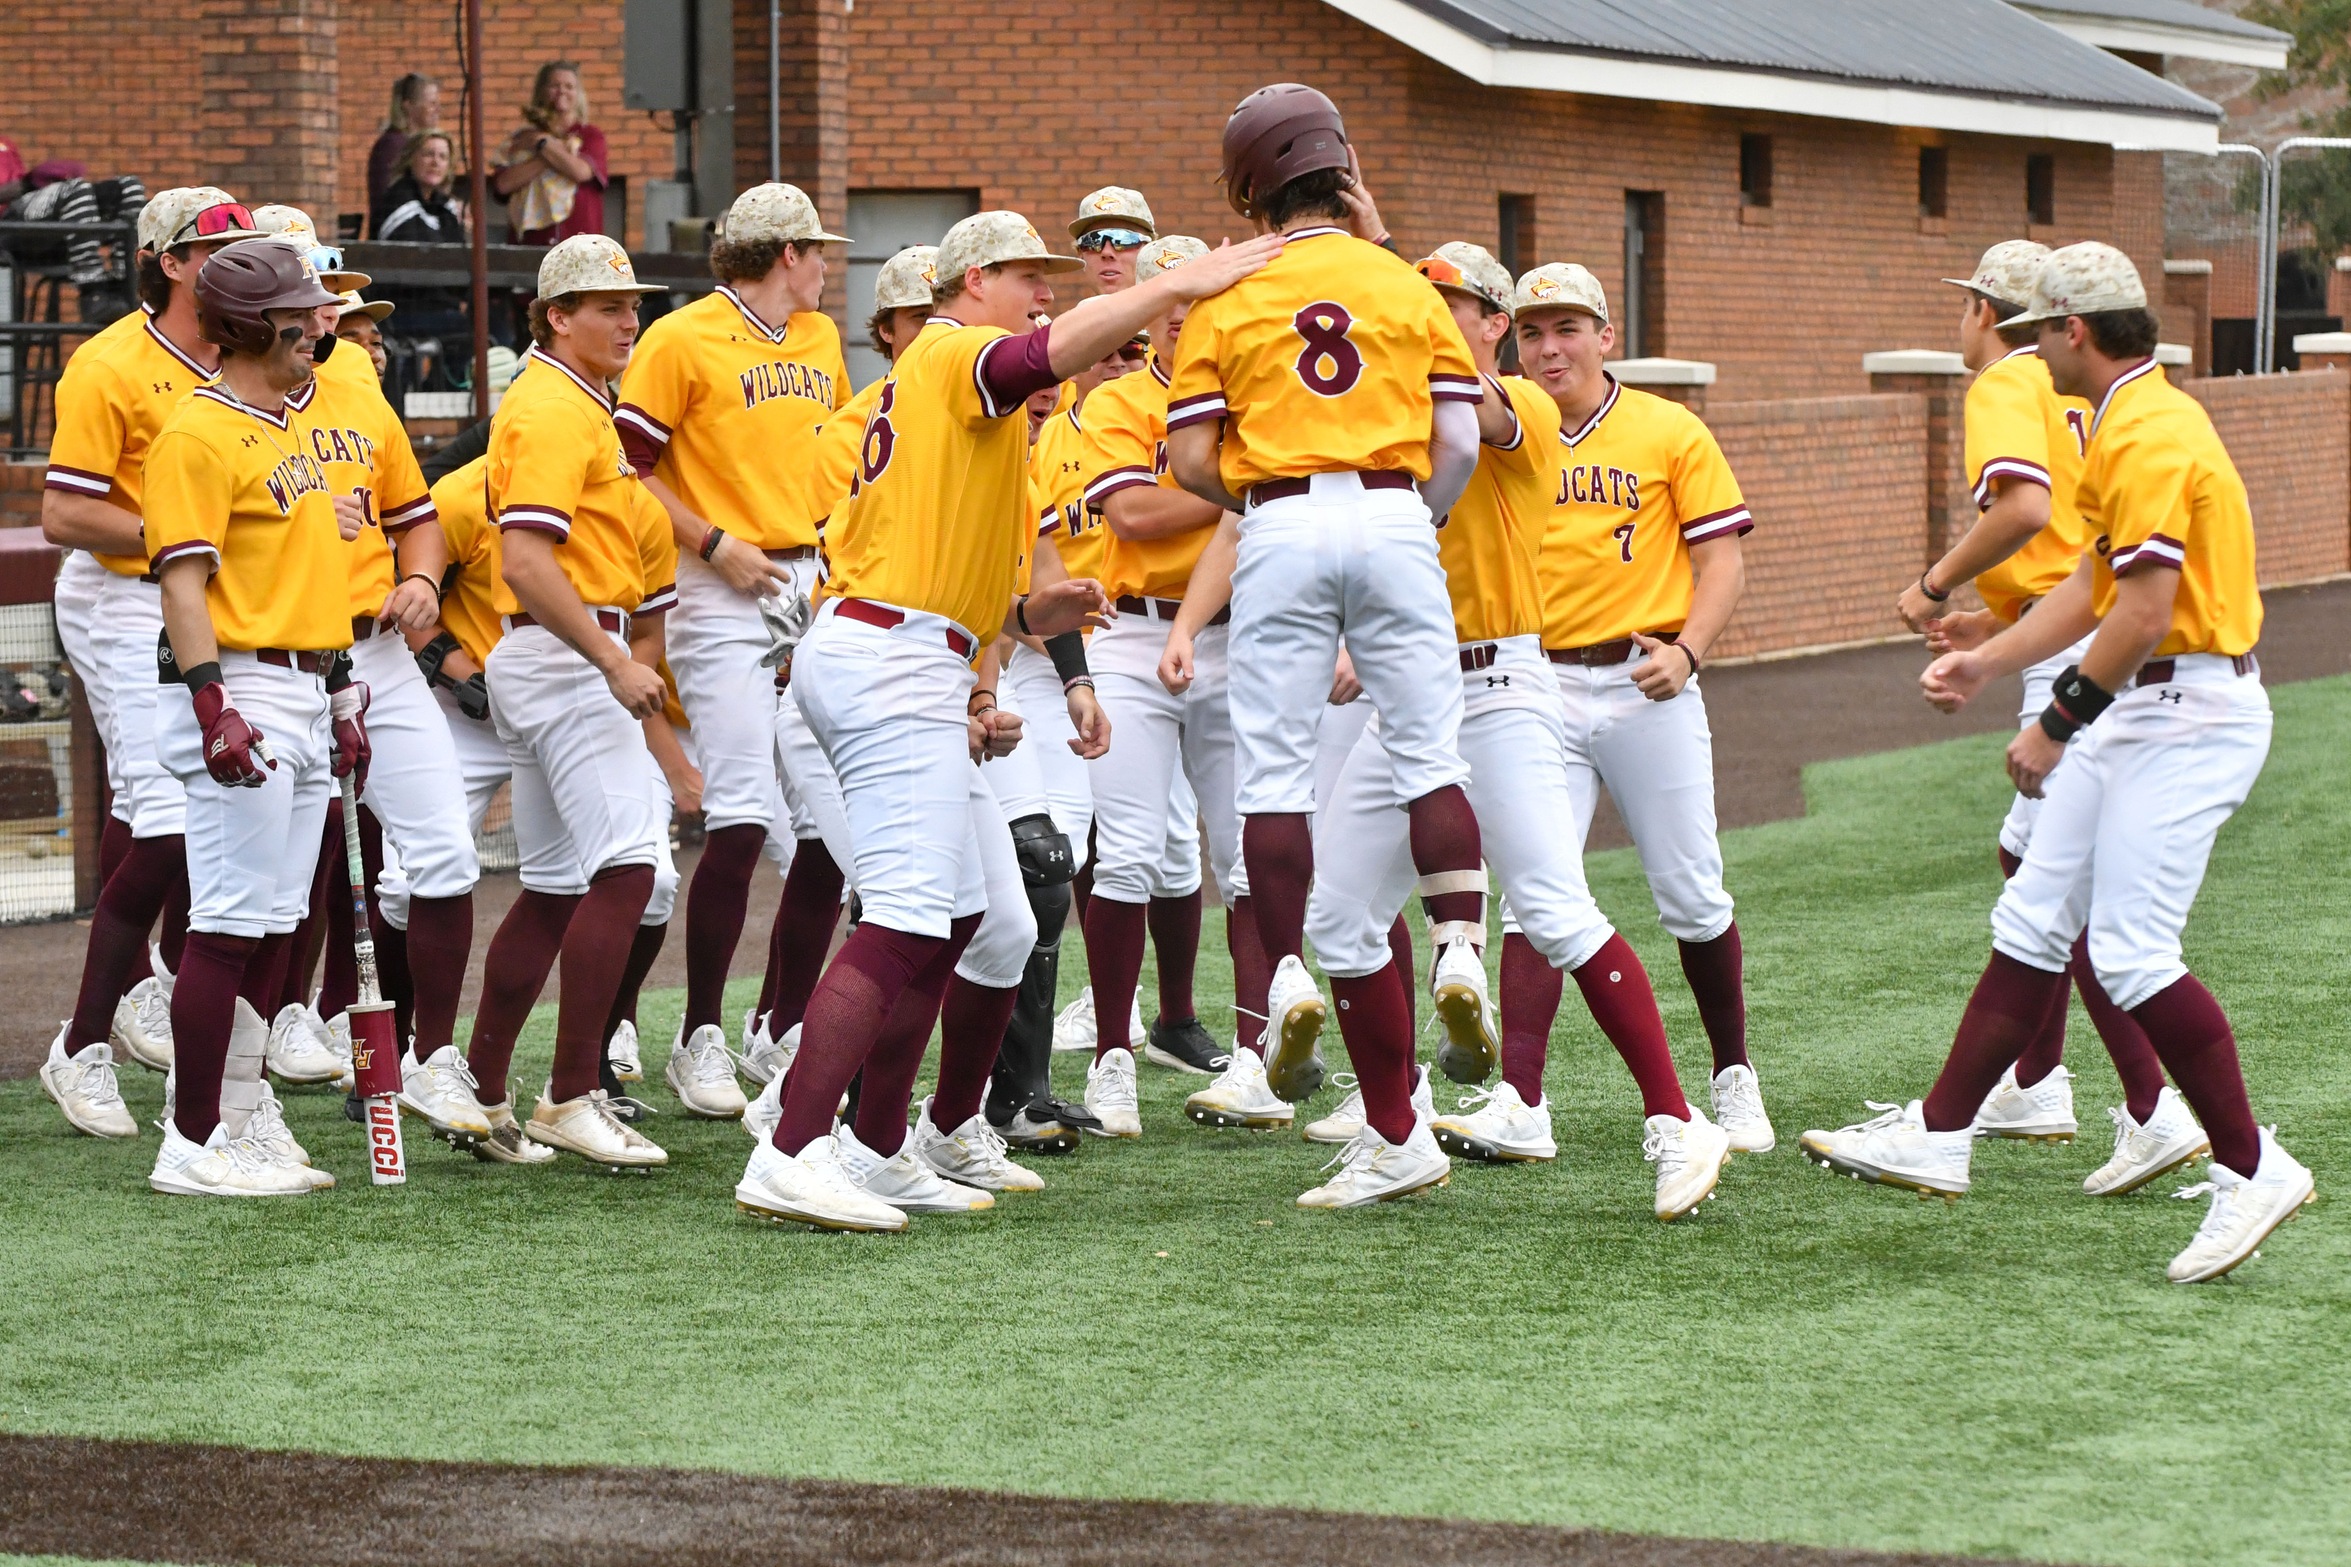 Parker Ryan (Madison; Jackson Academy) celebrates with his teammates after hitting his first Pearl River home run (Hannah Mills/PRCCAthletics).